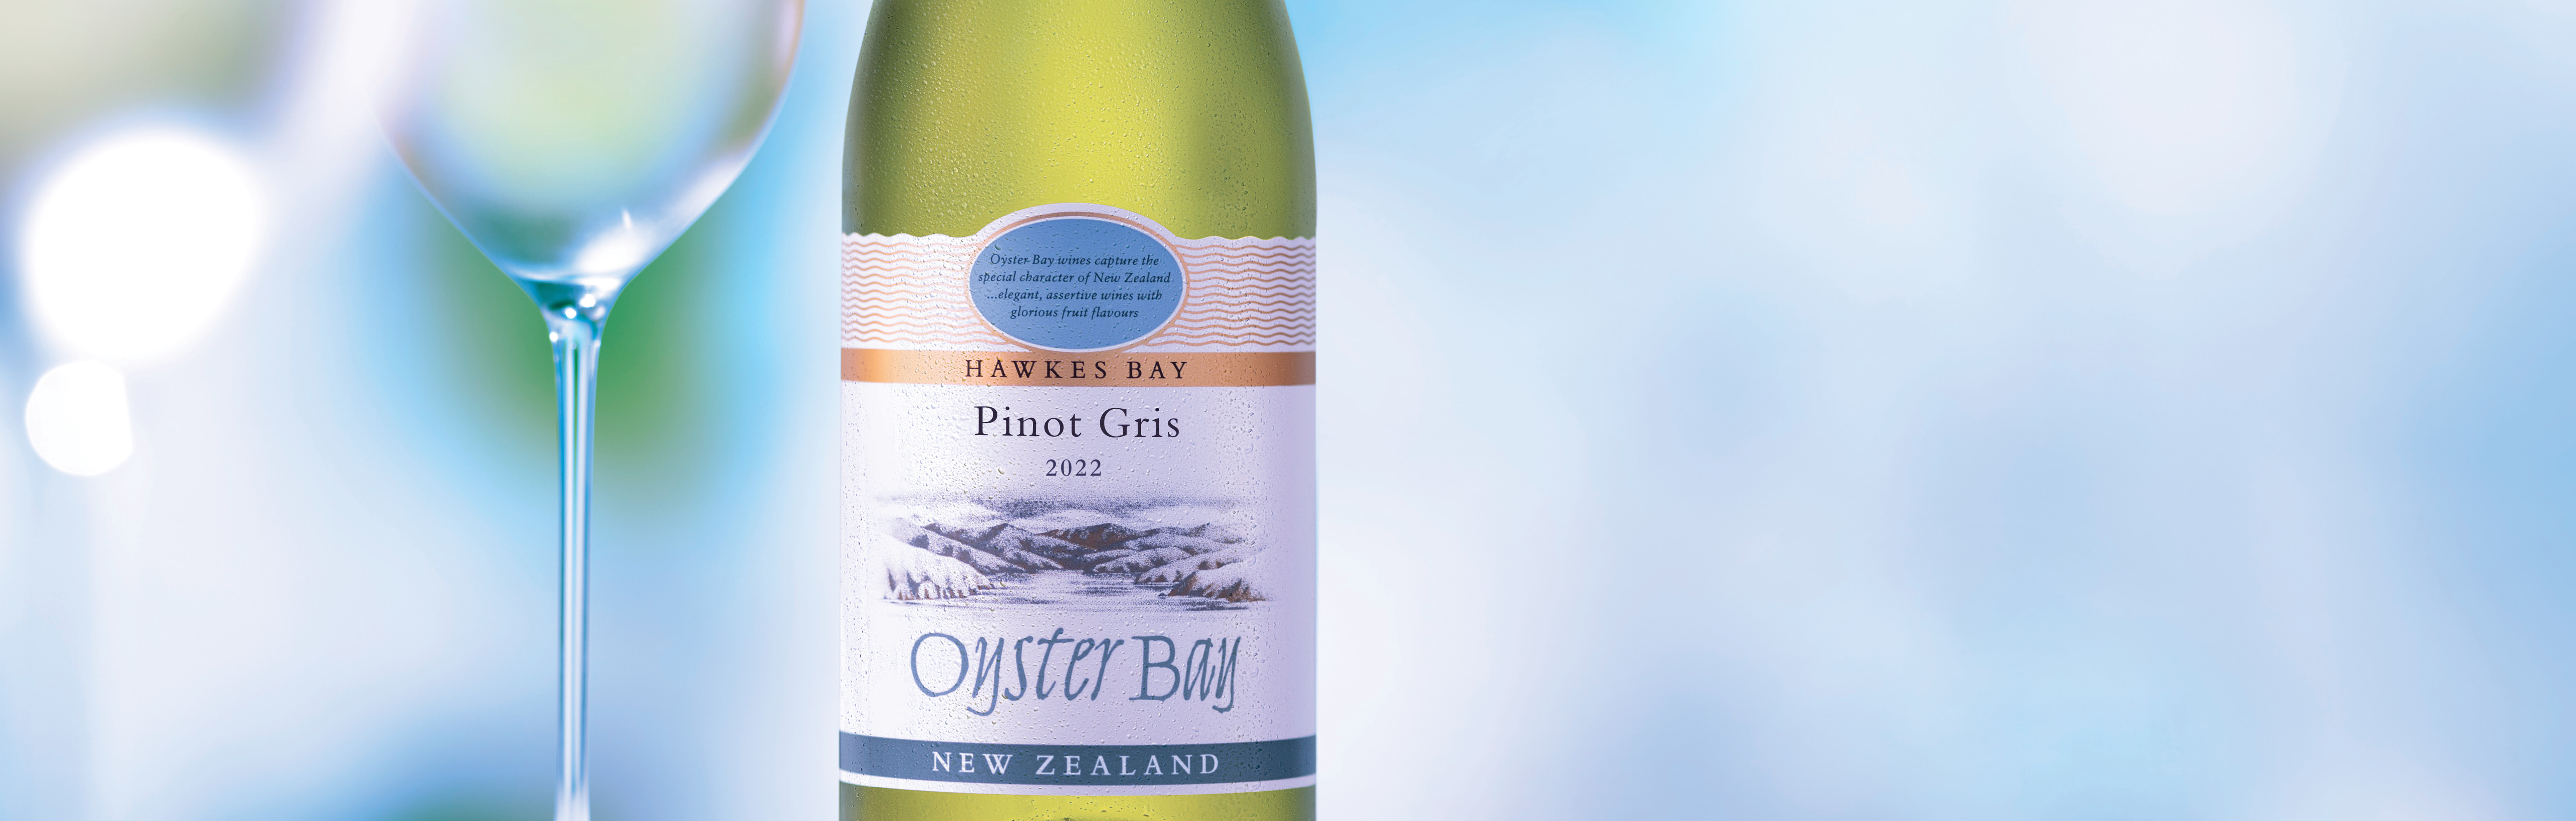 Oyster Bay Pinot Gris bottle with two glasses